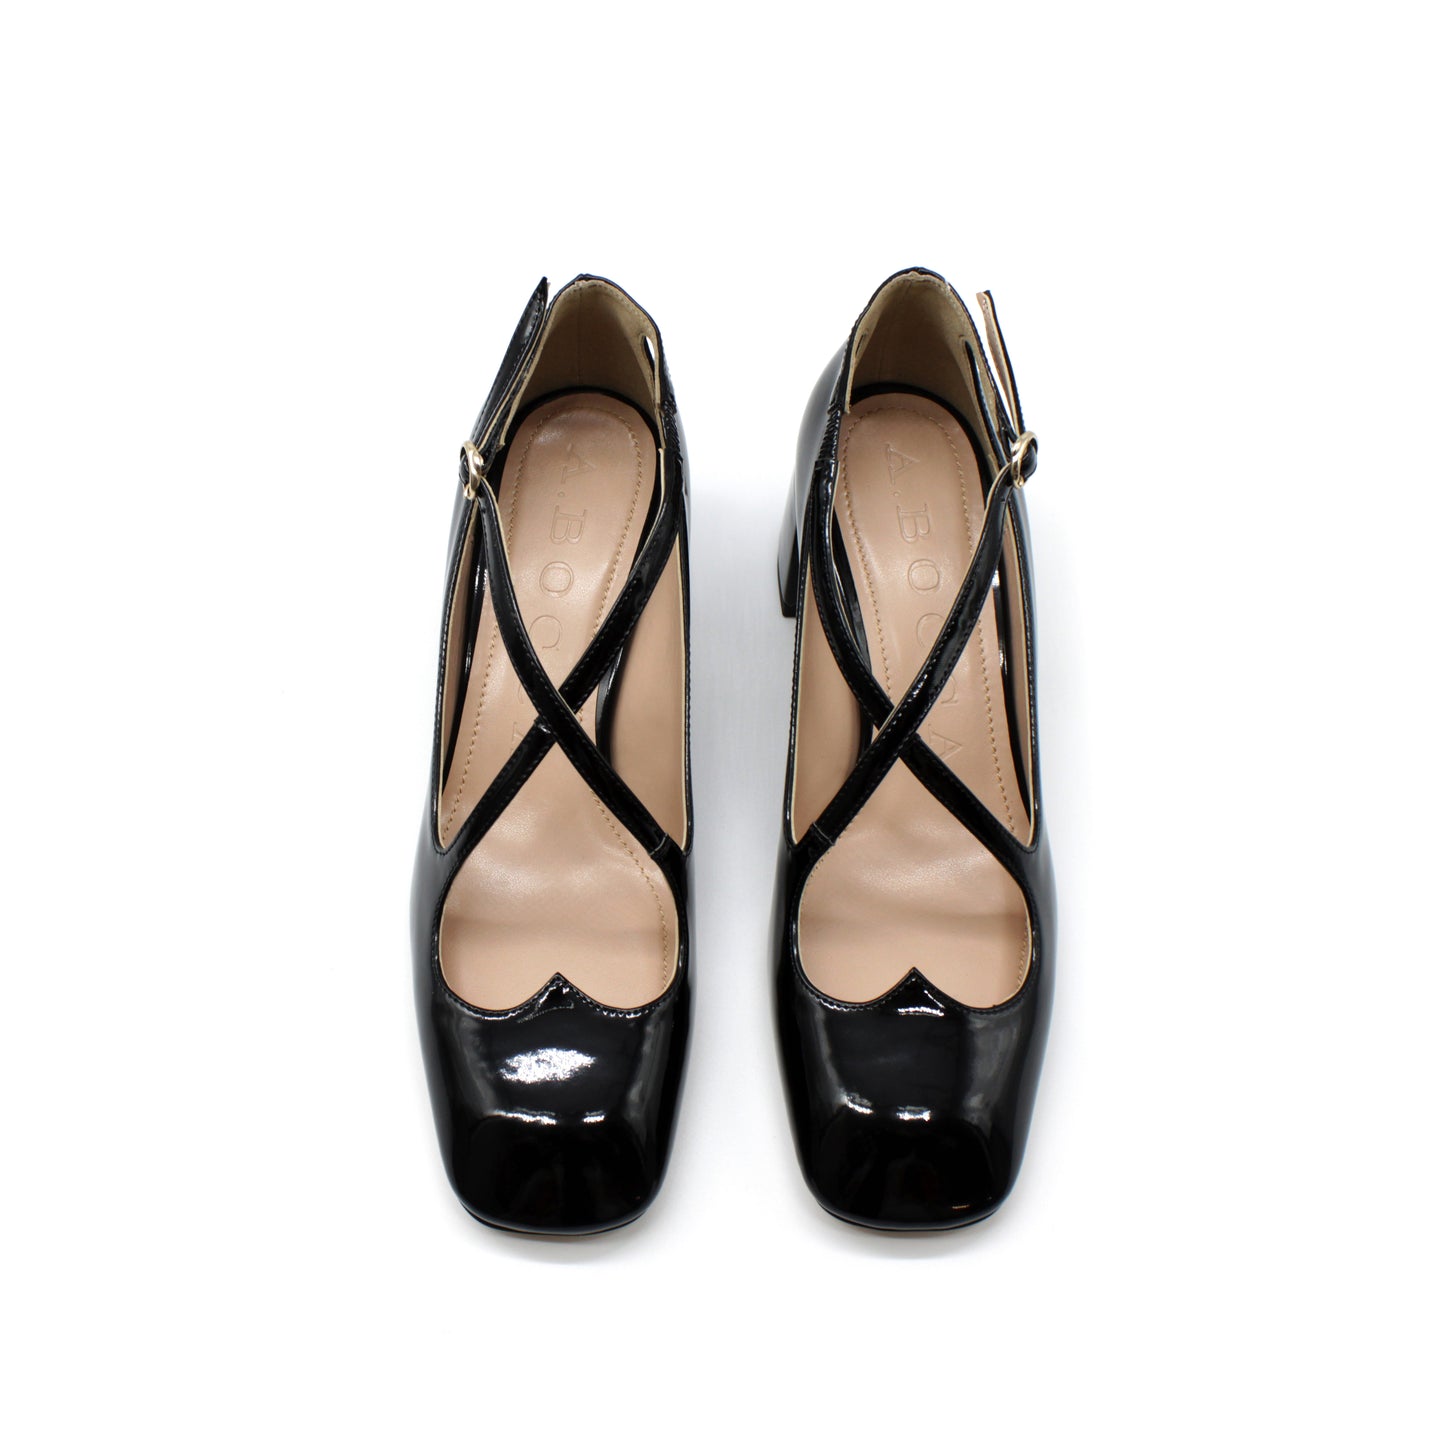 Pump Two for Love in black patent leather - VEGAN